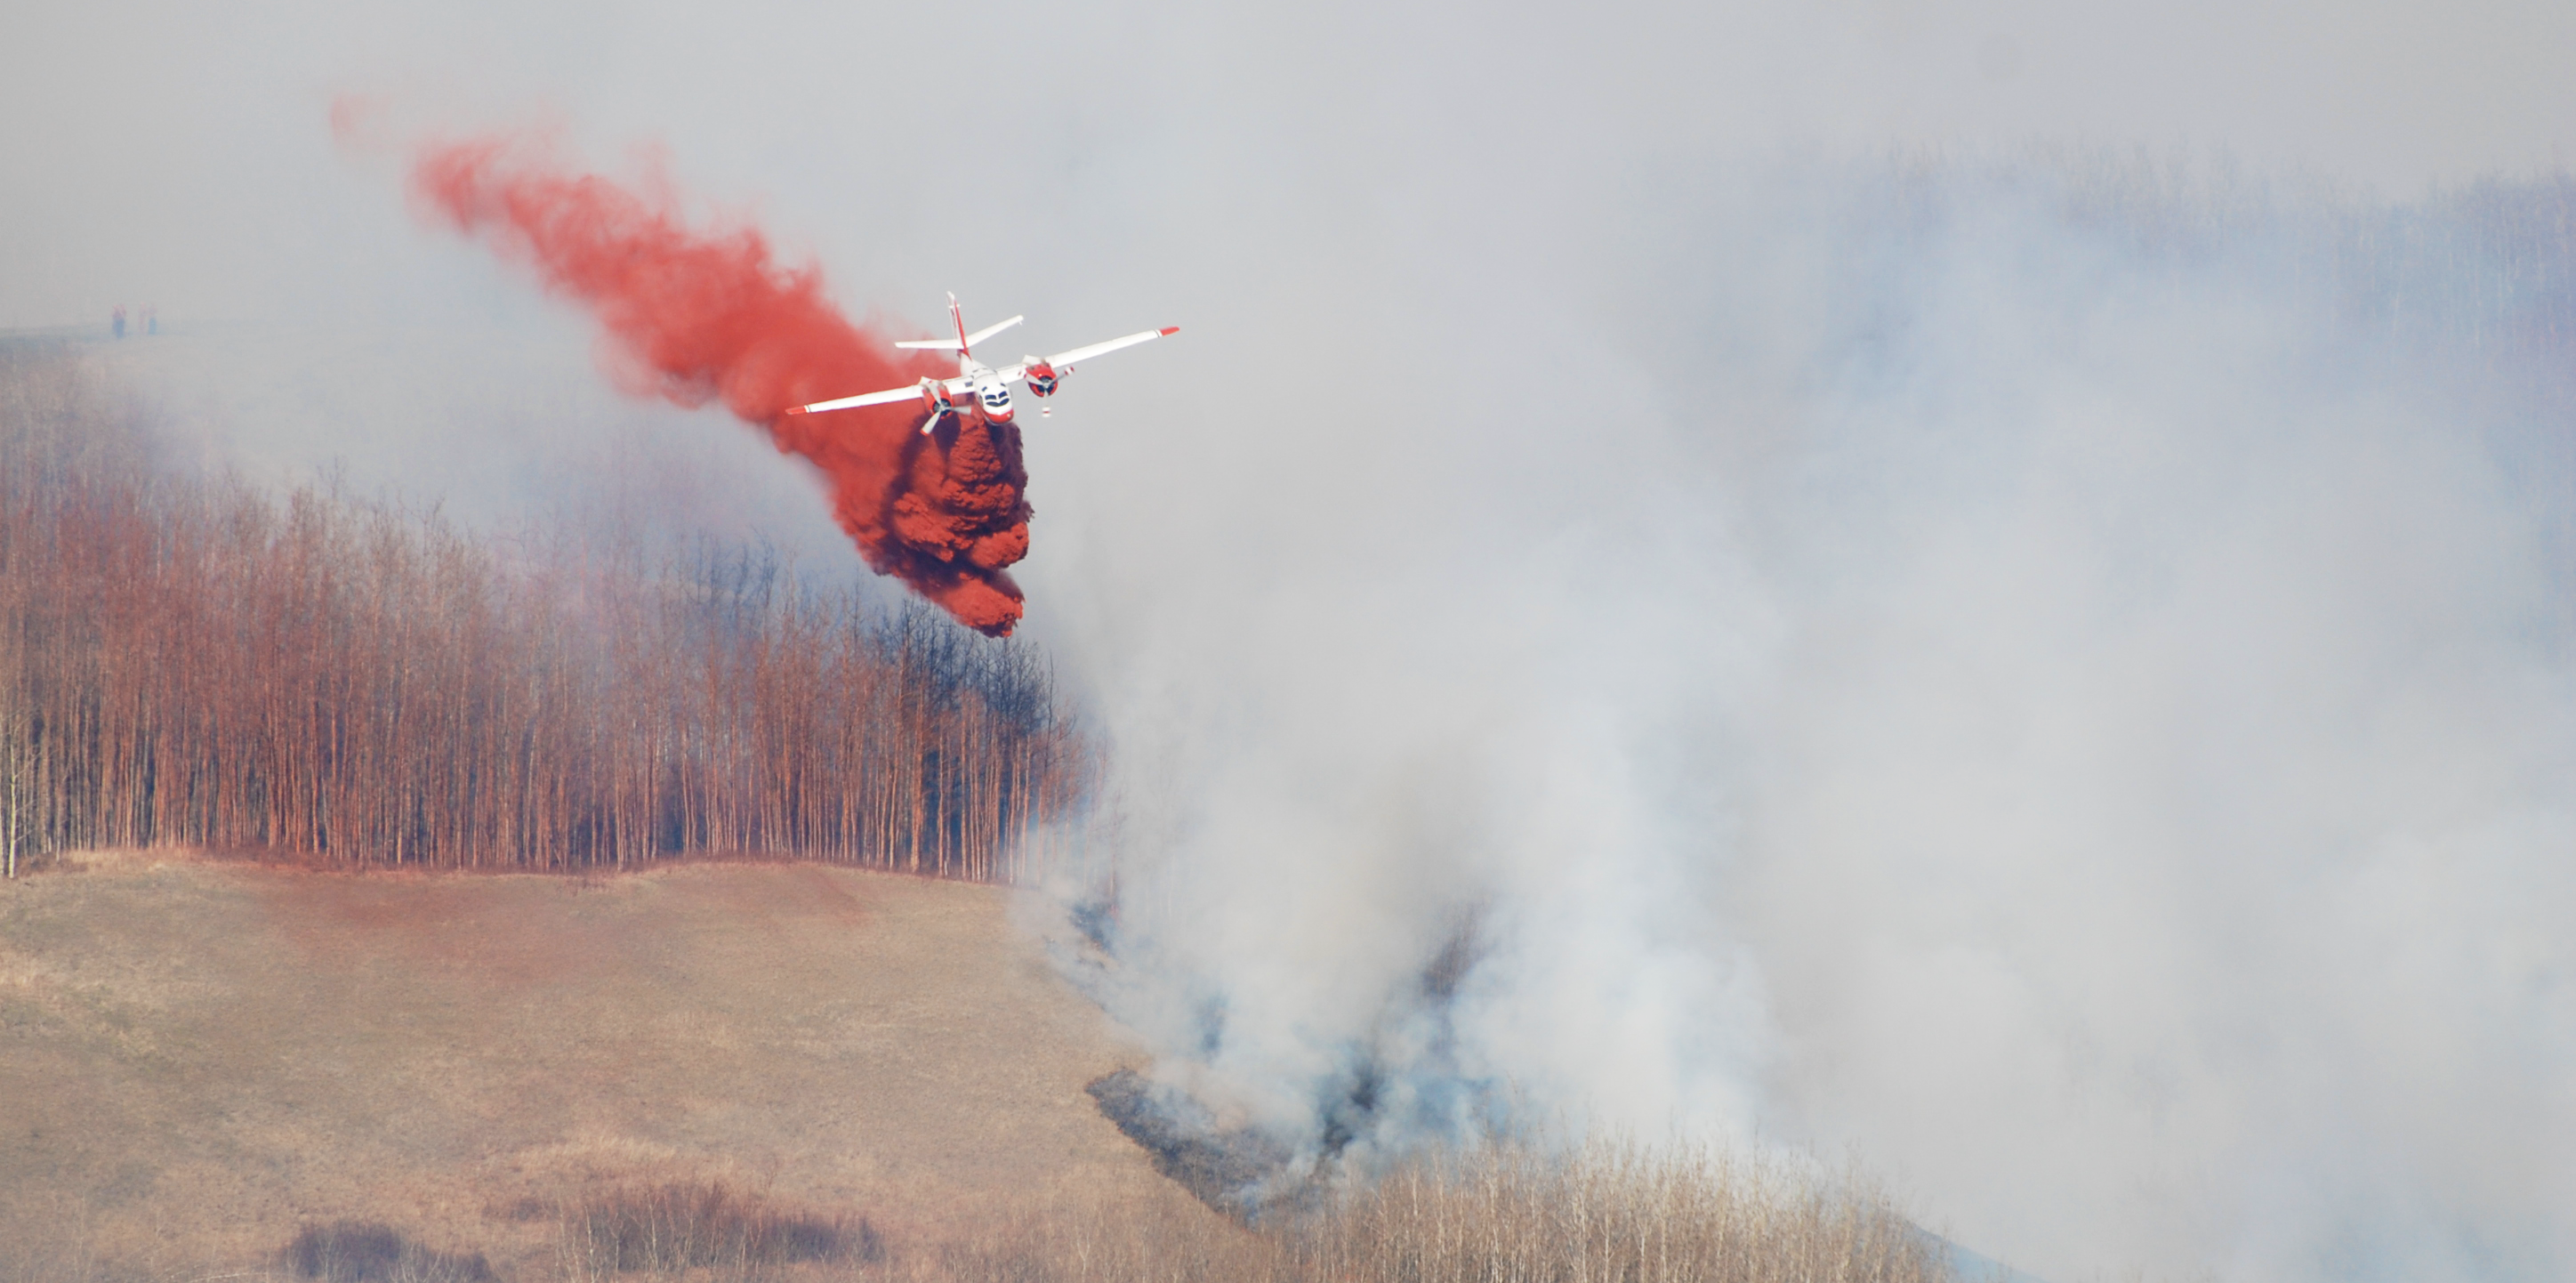 bc wildfire service air tanker dropping retardant near a wildfire